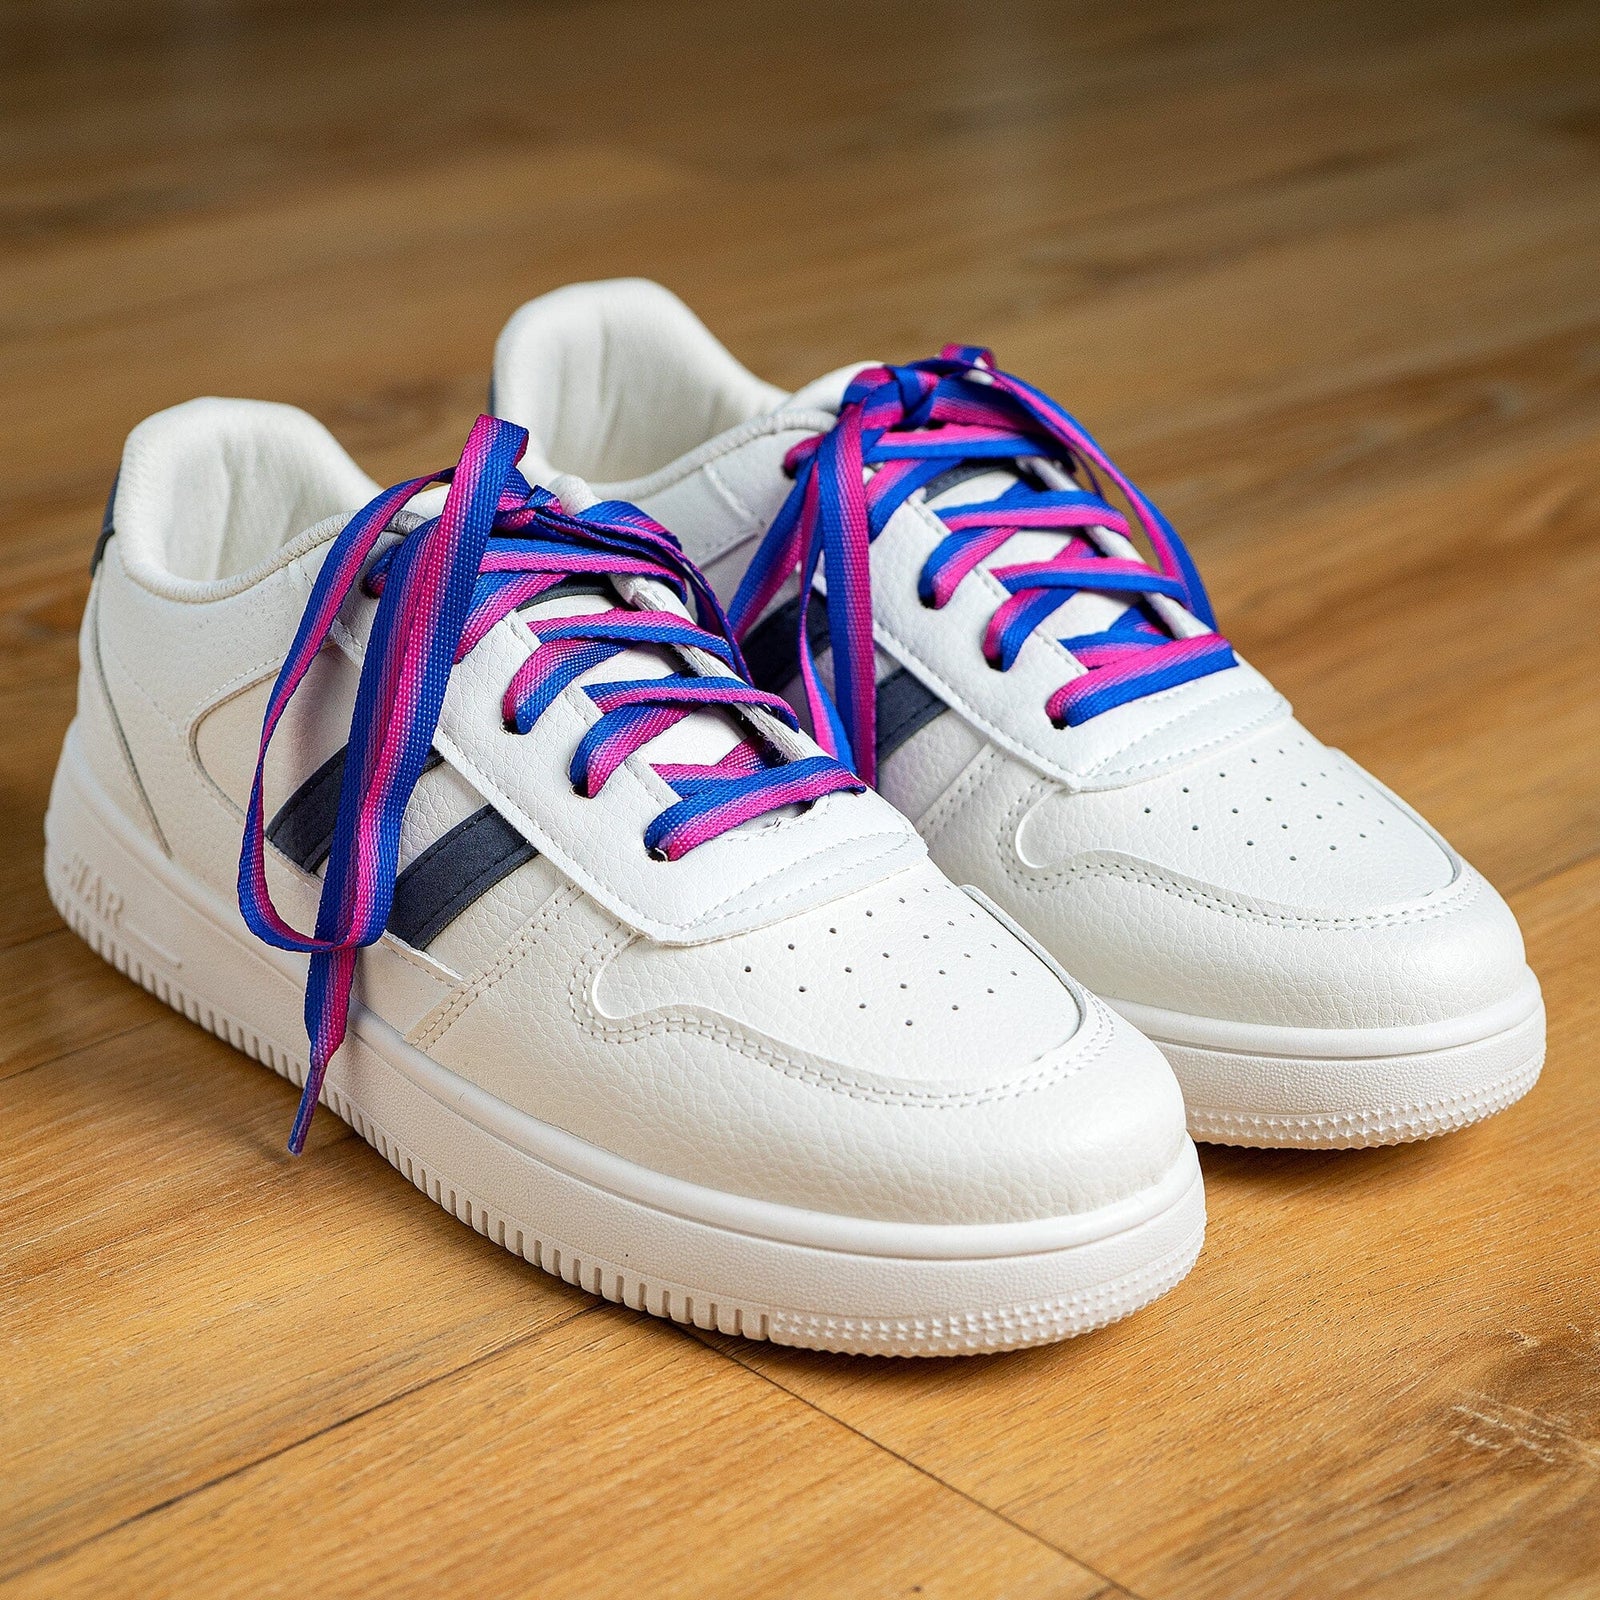 Bisexual Flag Shoe Laces, Bisexual Laces for Shoes, PRIDE Gear